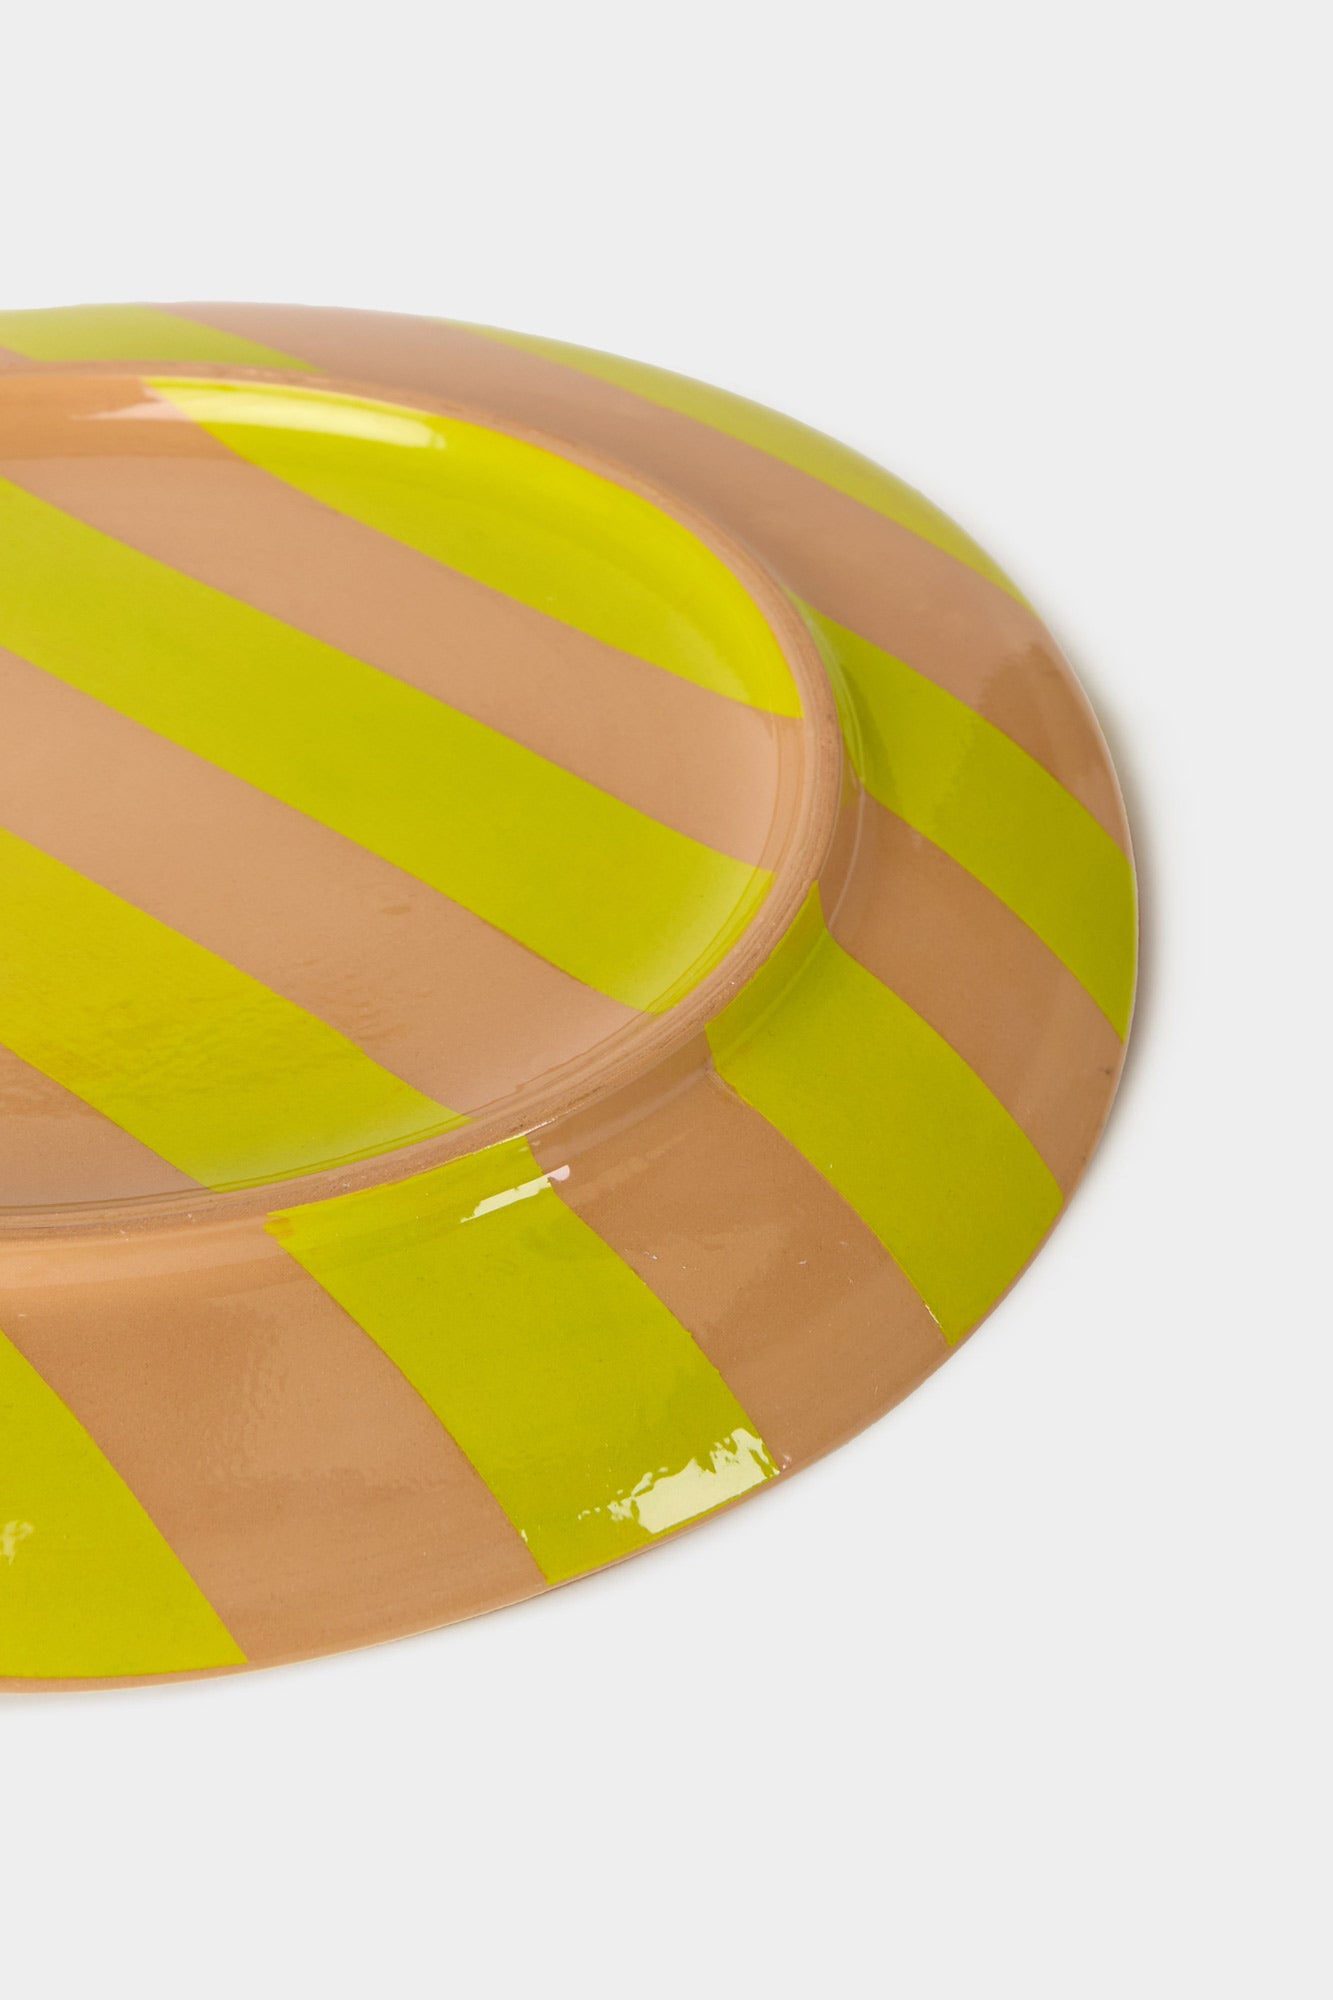 TERRACOTTA BELLISOTTO DINNER PLATE / yellow